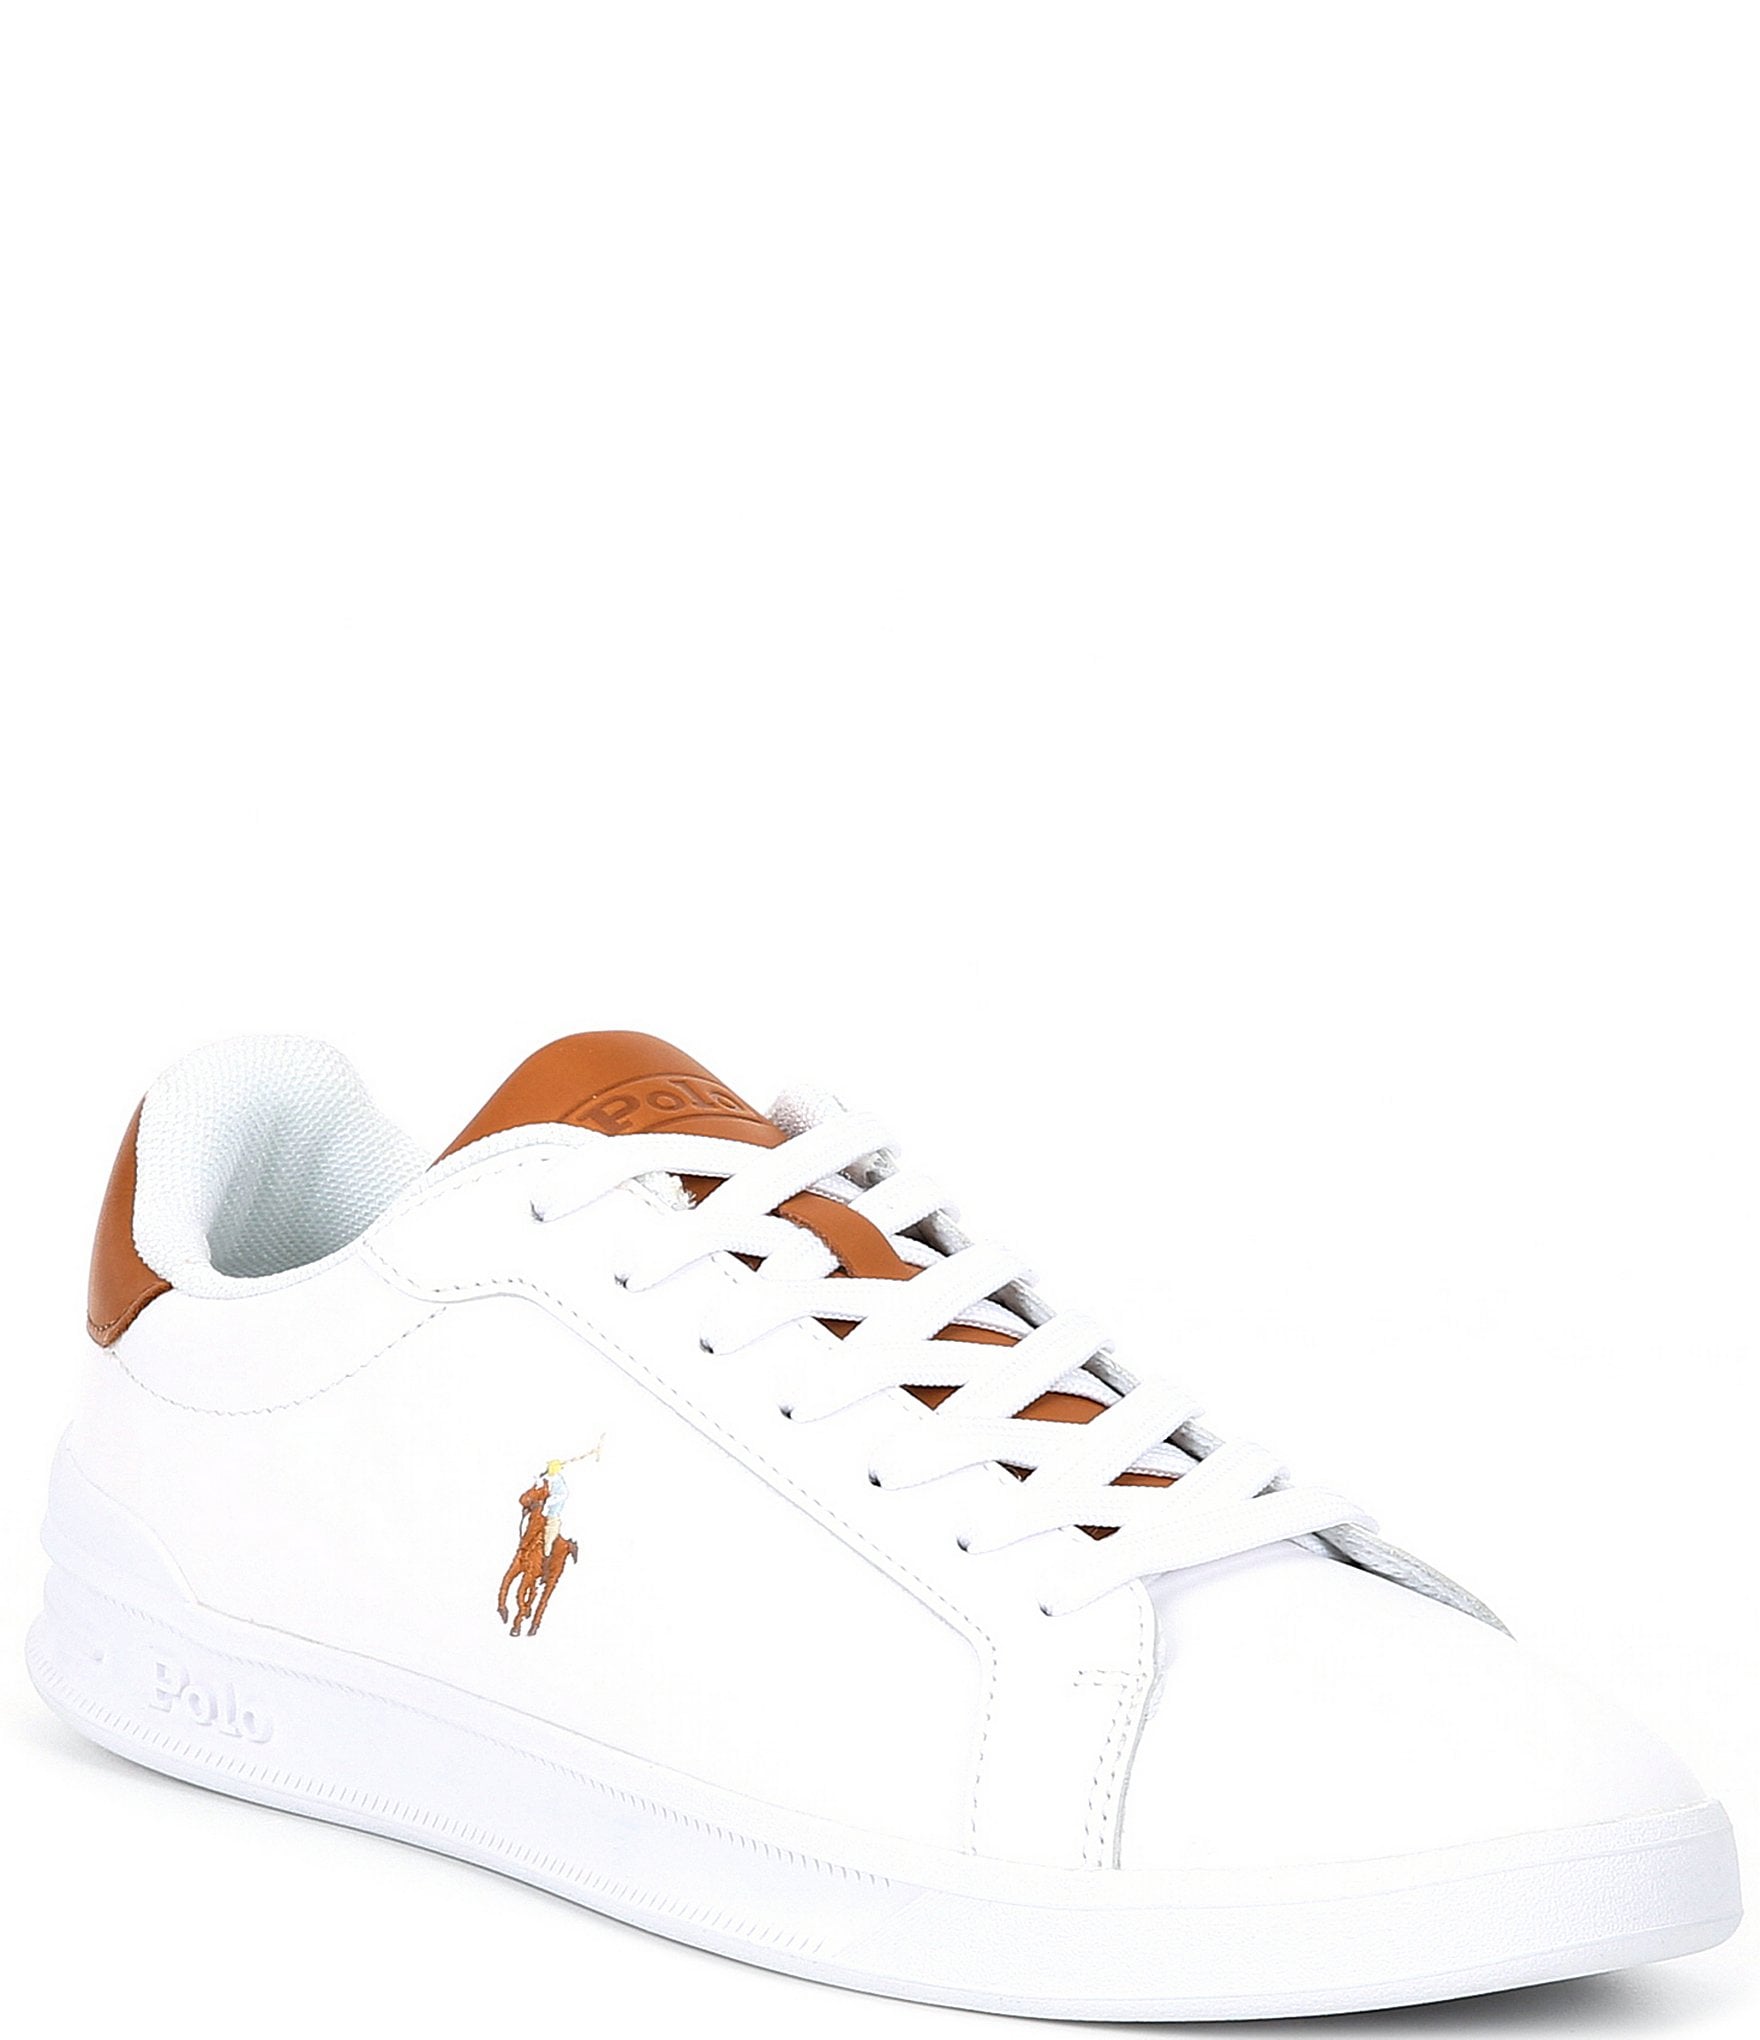 Aggregate more than 140 polo leather sneakers